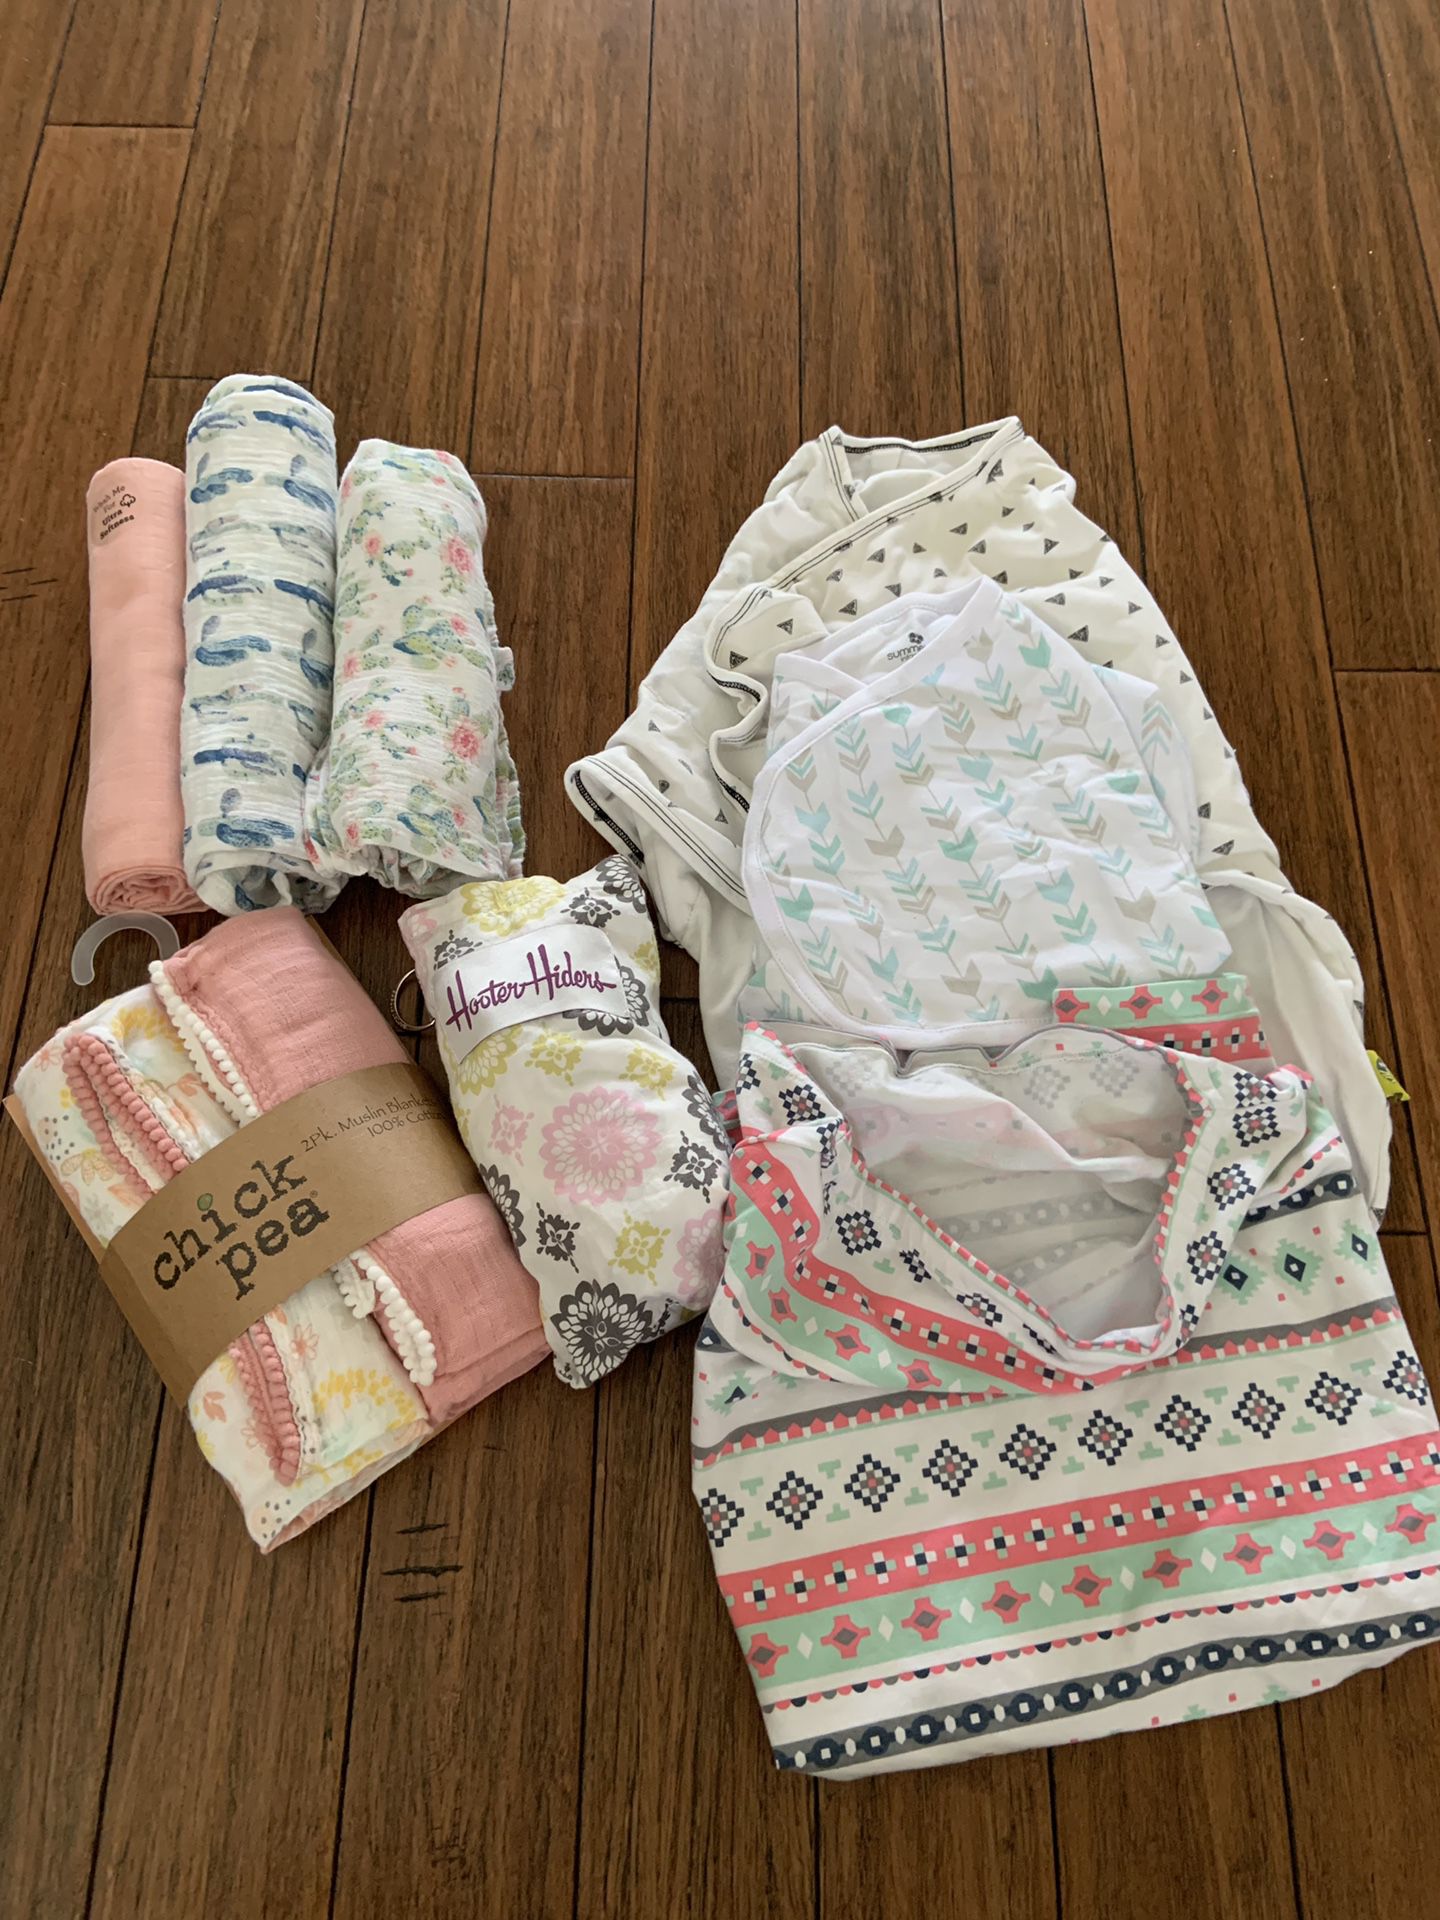 Baby swaddle and nursing lot!